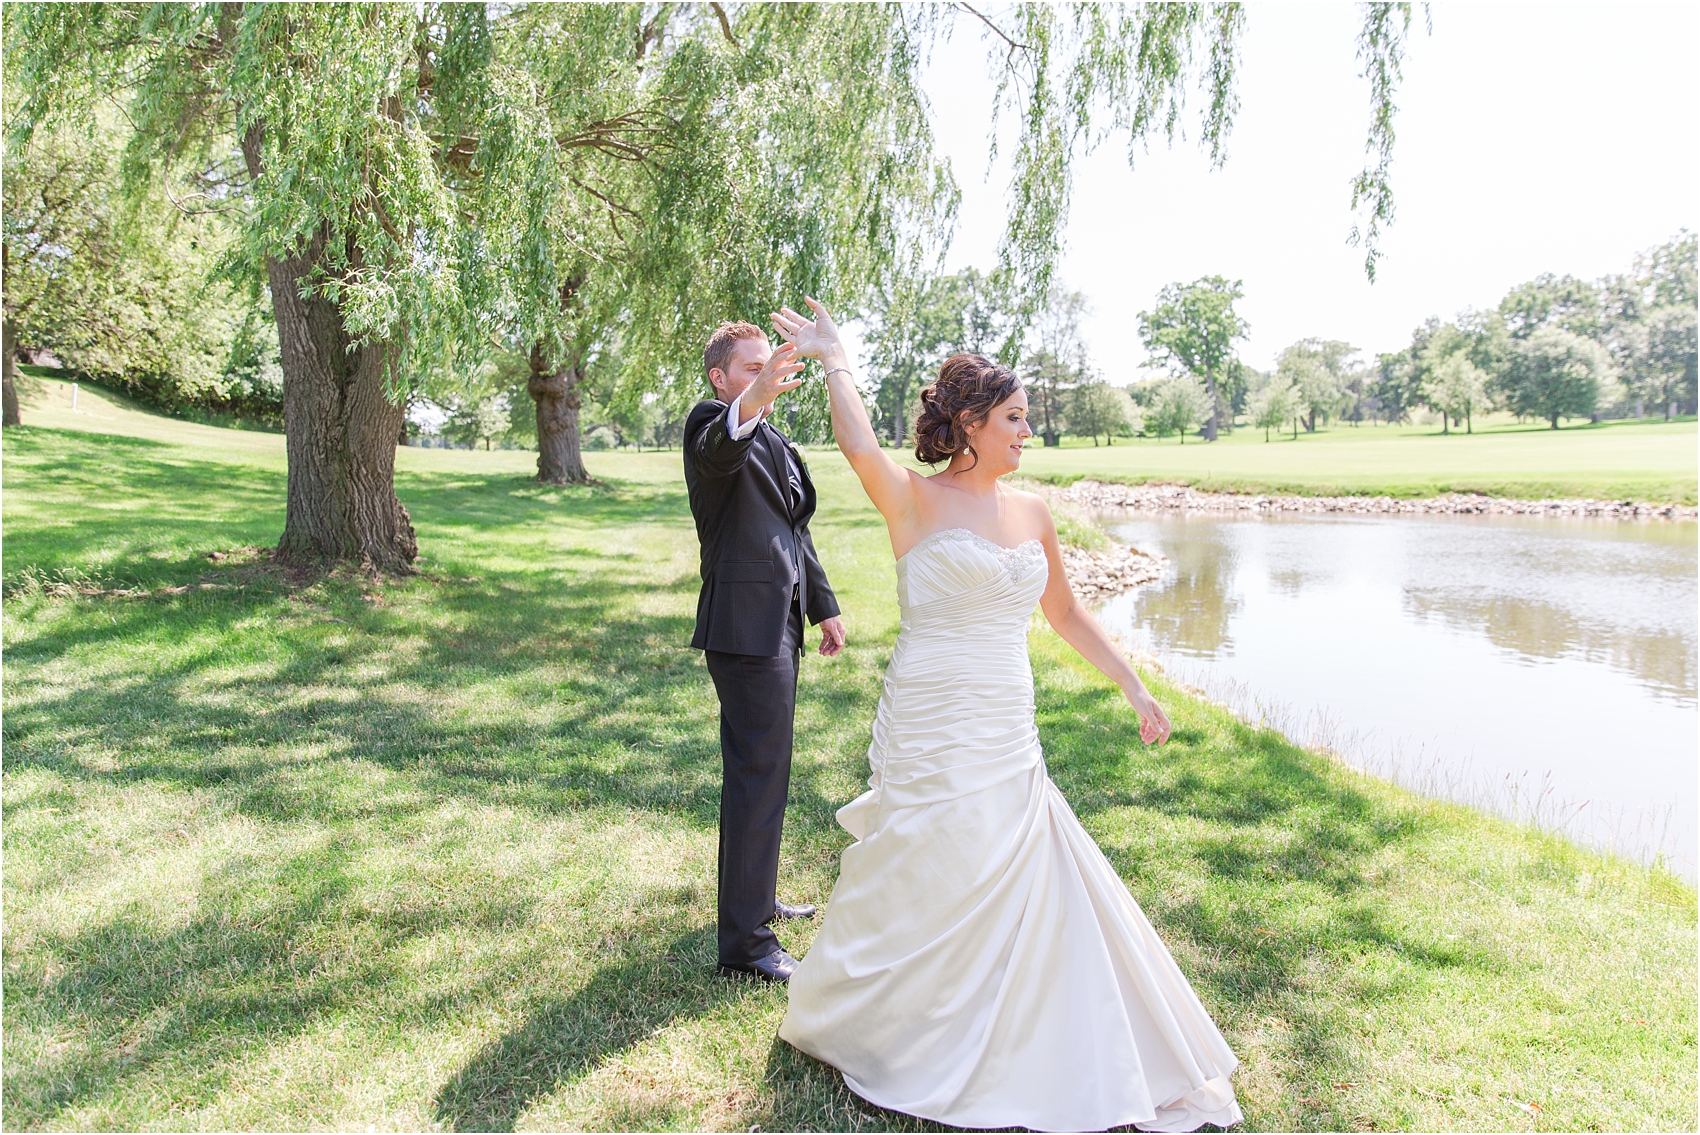 classic-wedding-photos-at-great-oaks-country-club-in-rochester-hills-mi-by-courtney-carolyn-photography_0055.jpg